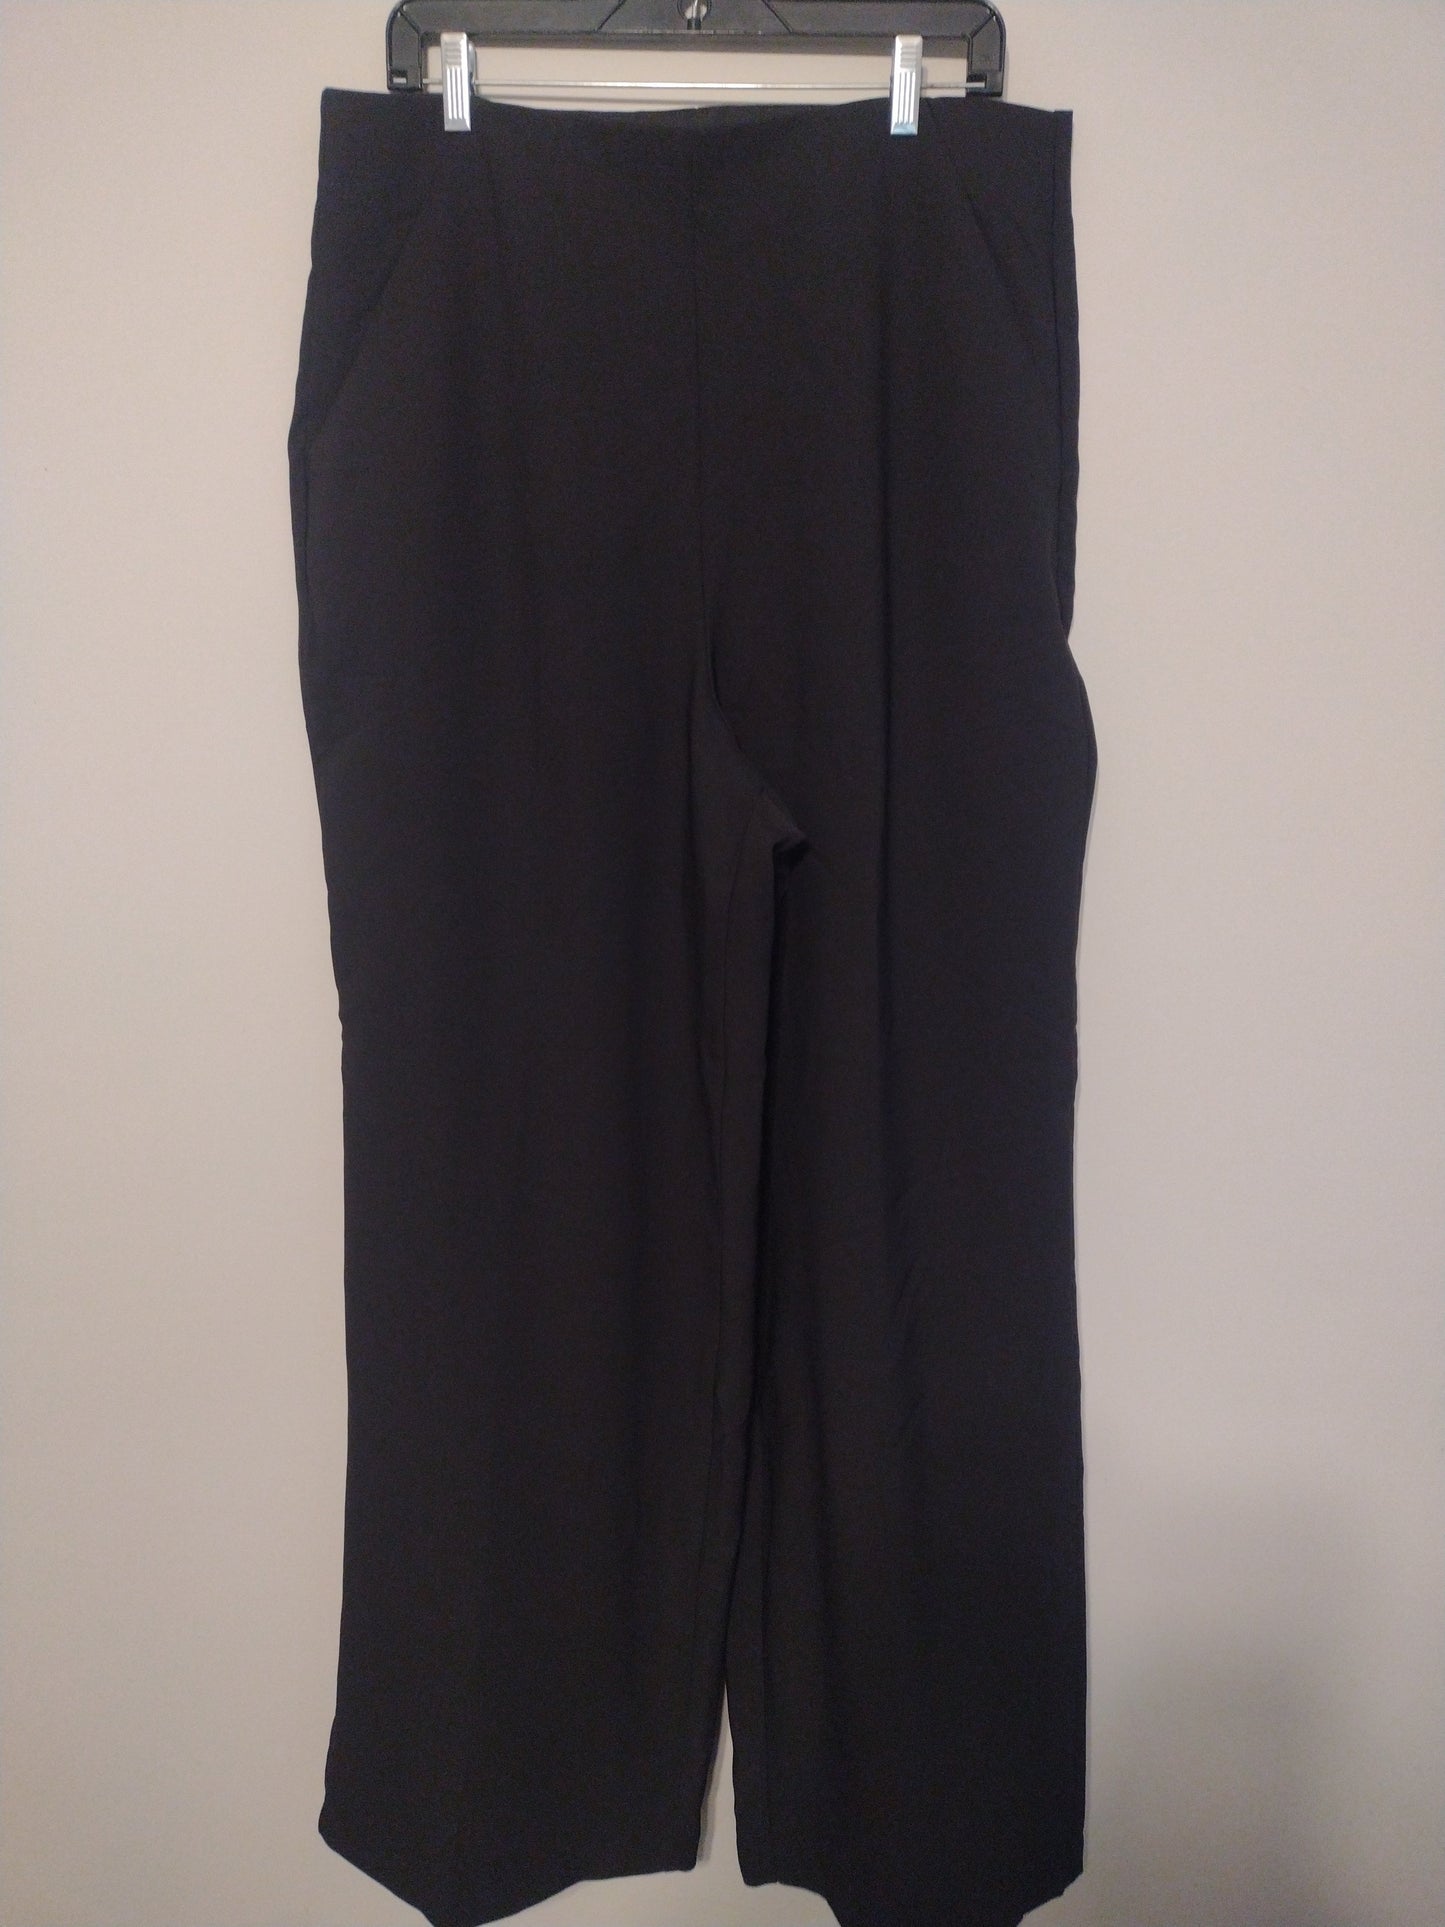 Pants Ankle By Torrid  Size: 1x